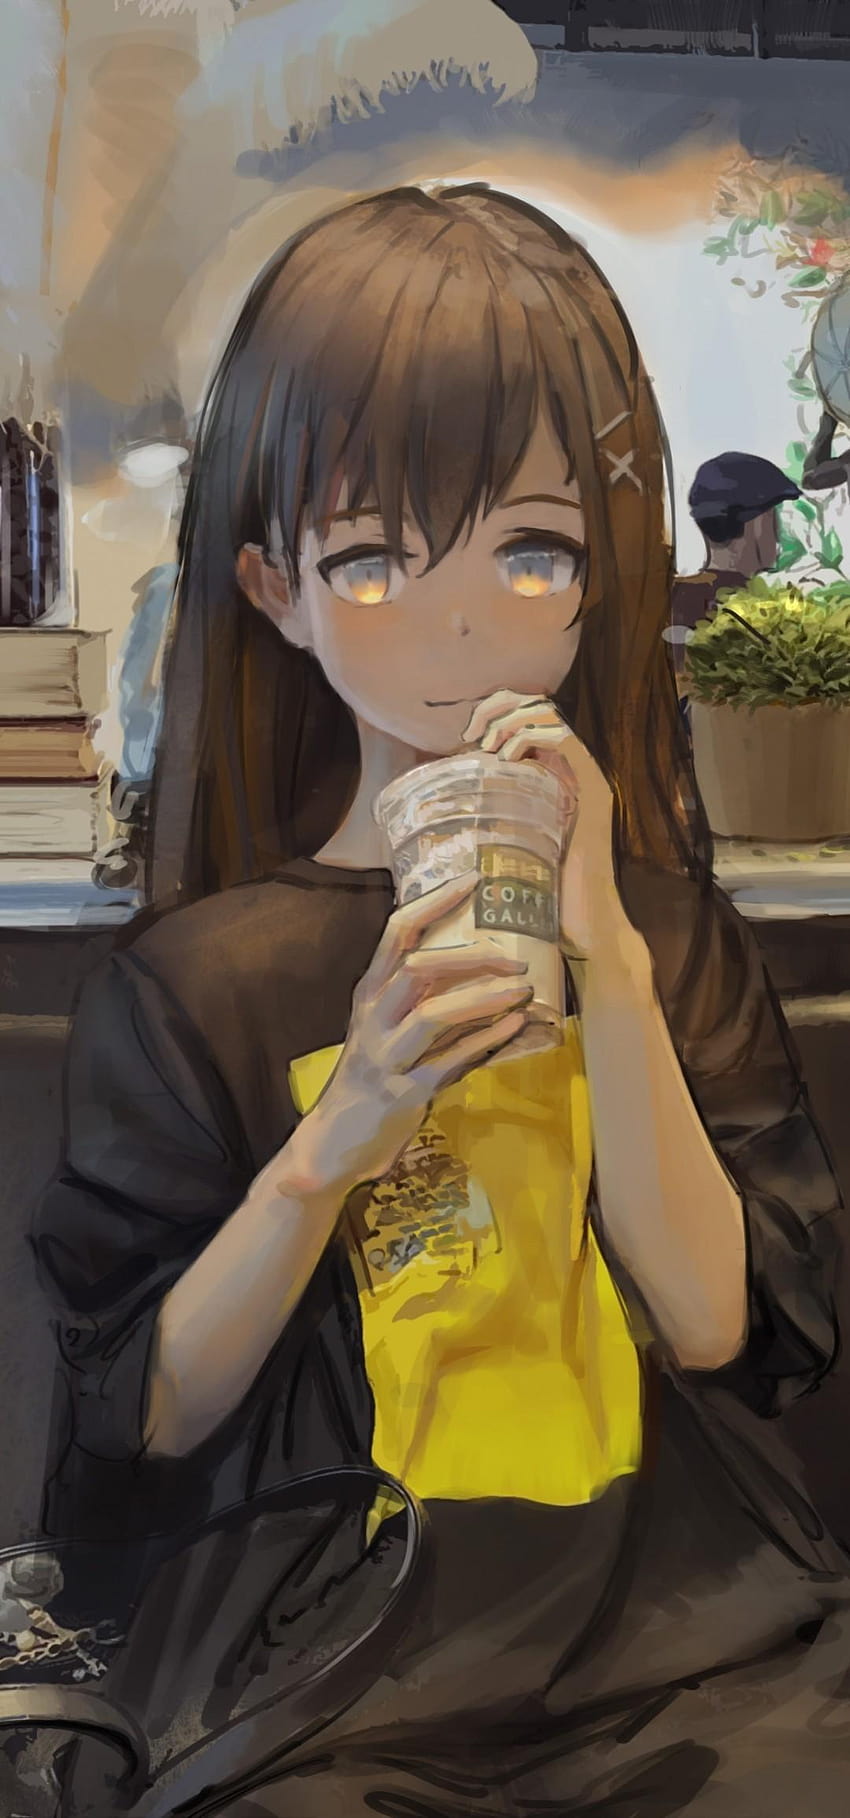 Cute Anime Girls Drinking Coffee posted by Zoey Mercado, cute anime girl drinking boba HD phone wallpaper